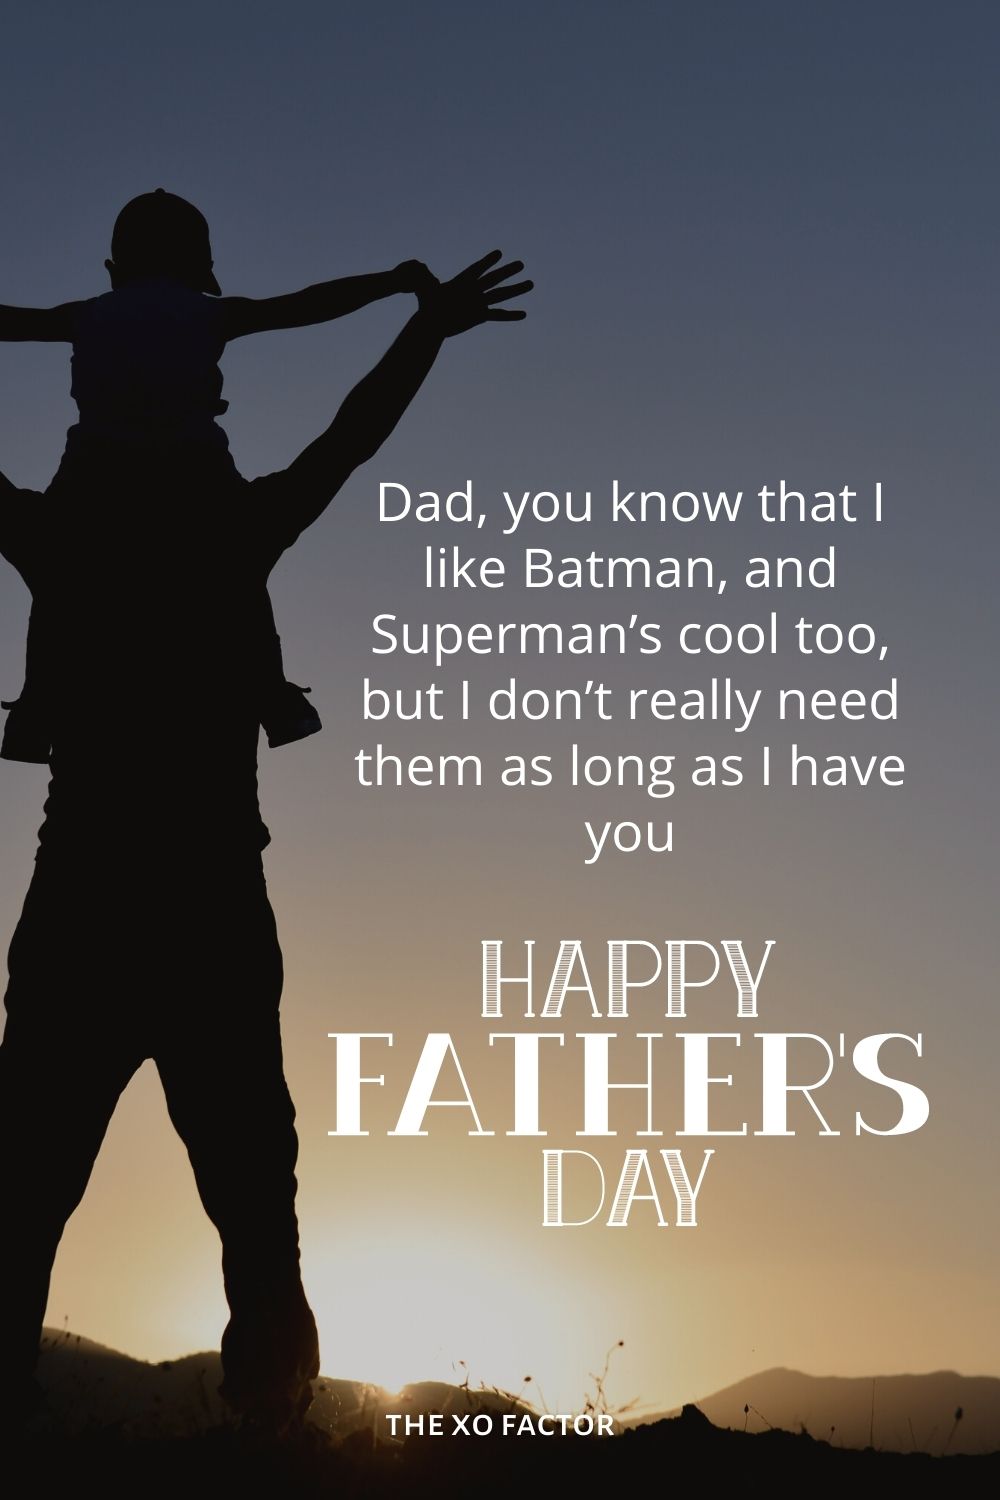 Dad, you know that I like Batman, and Superman’s cool too, but I don’t really need them as long as I have you! Happy Father’s day to my super Dad! father's day wishes